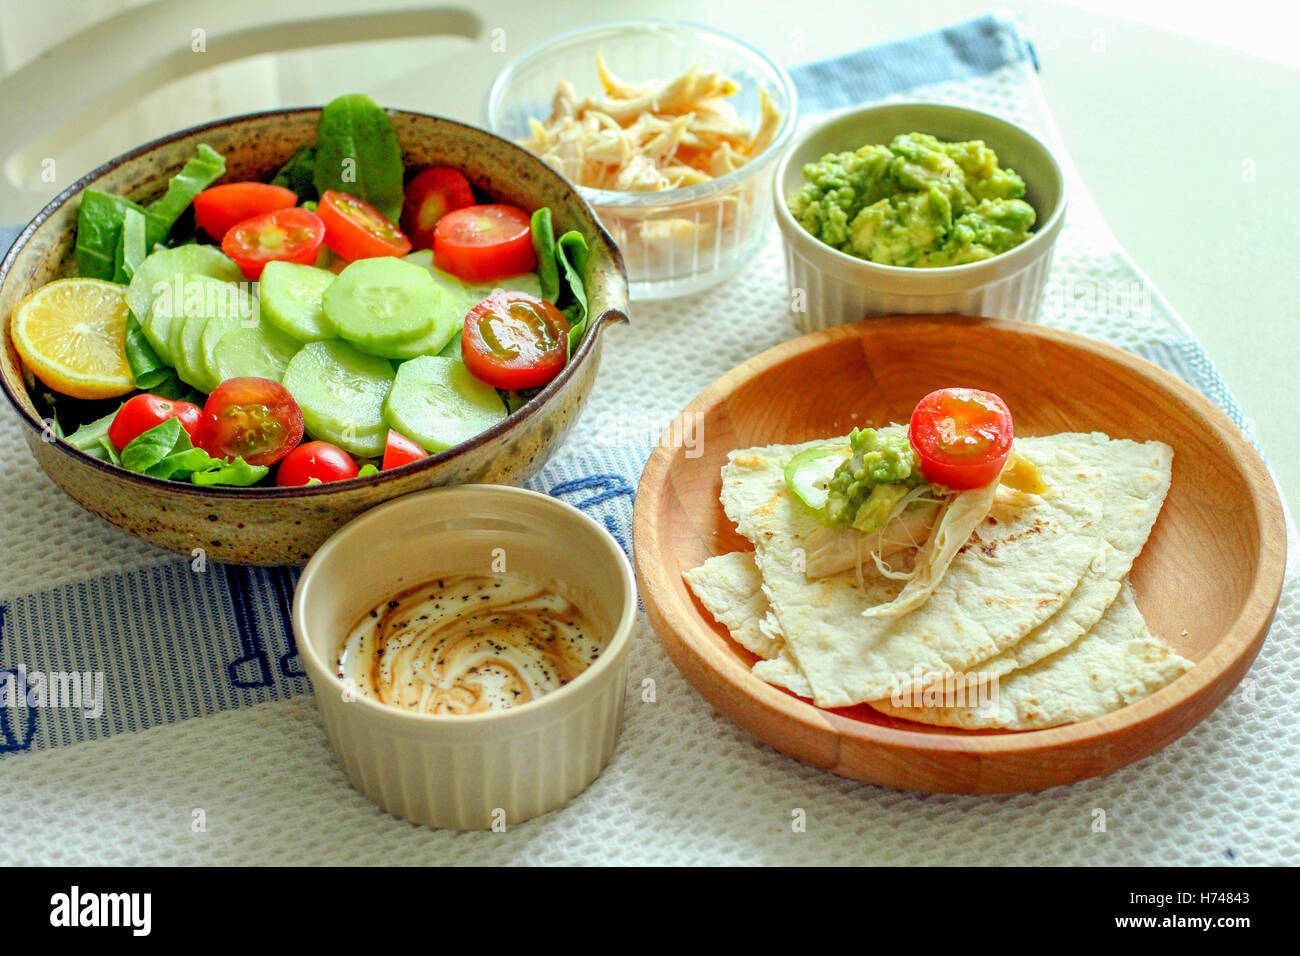 Healthy meal with organic tomato green salad, naan bread and dessert Stock  Photo - Alamy